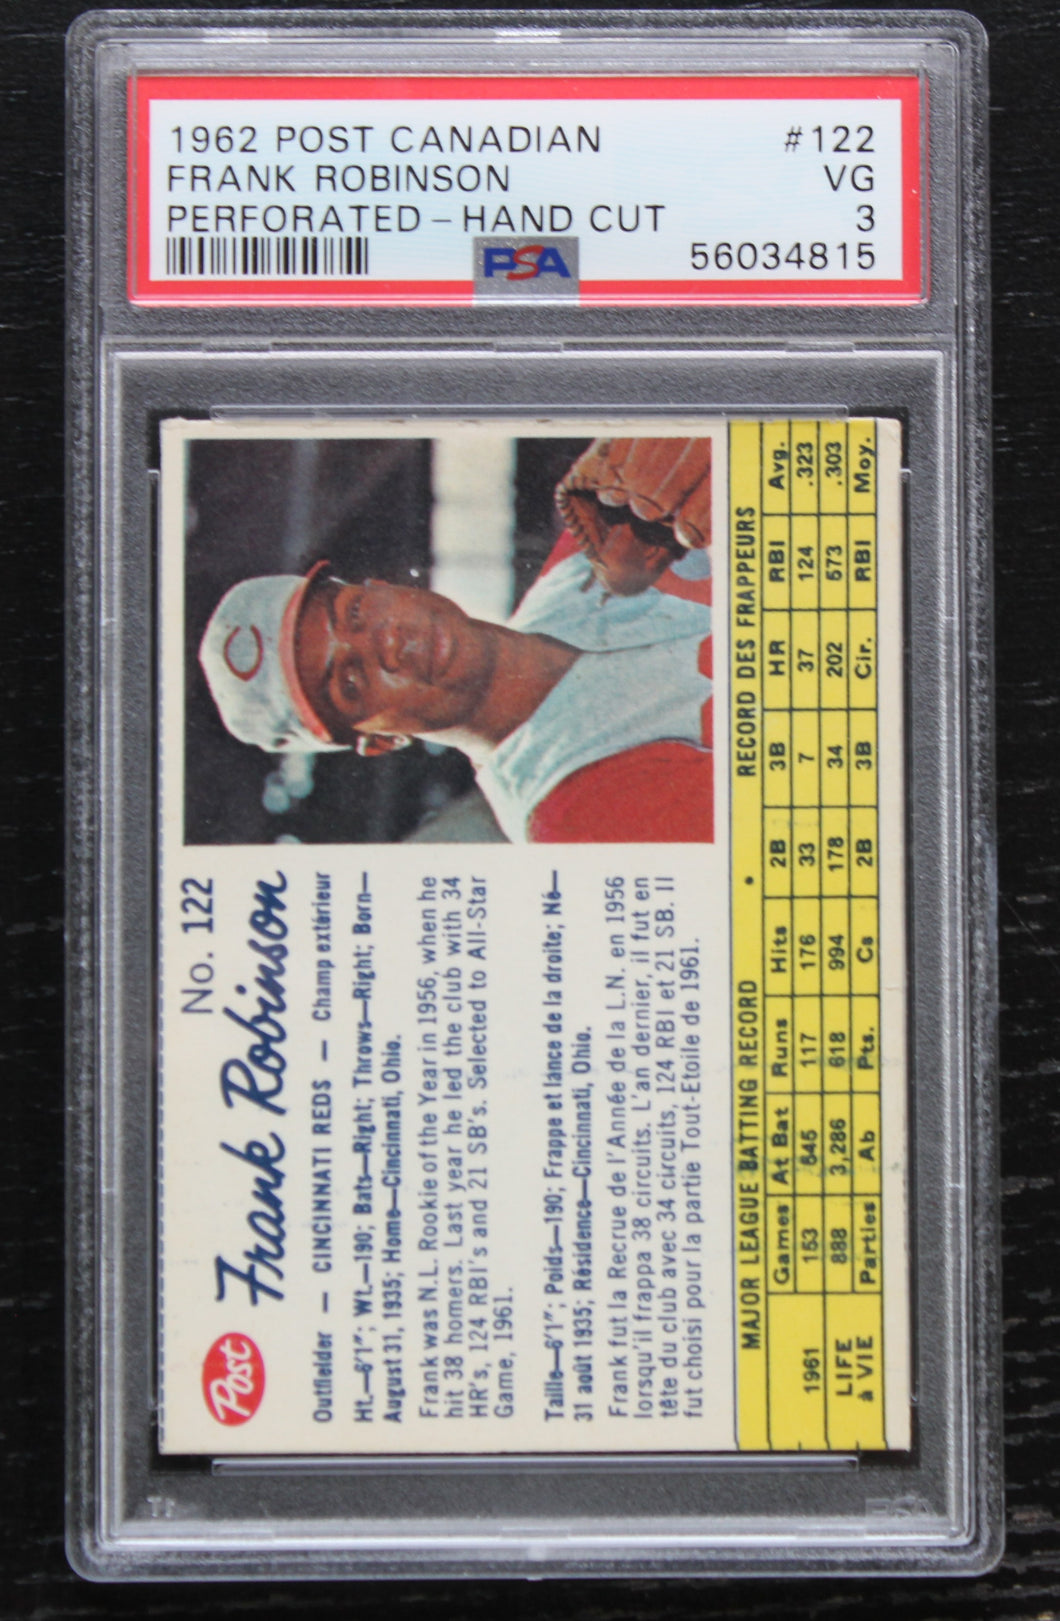 1962 Post Canadian Frank Robinson Perforated - Hand Cut #122 PSA VG 3